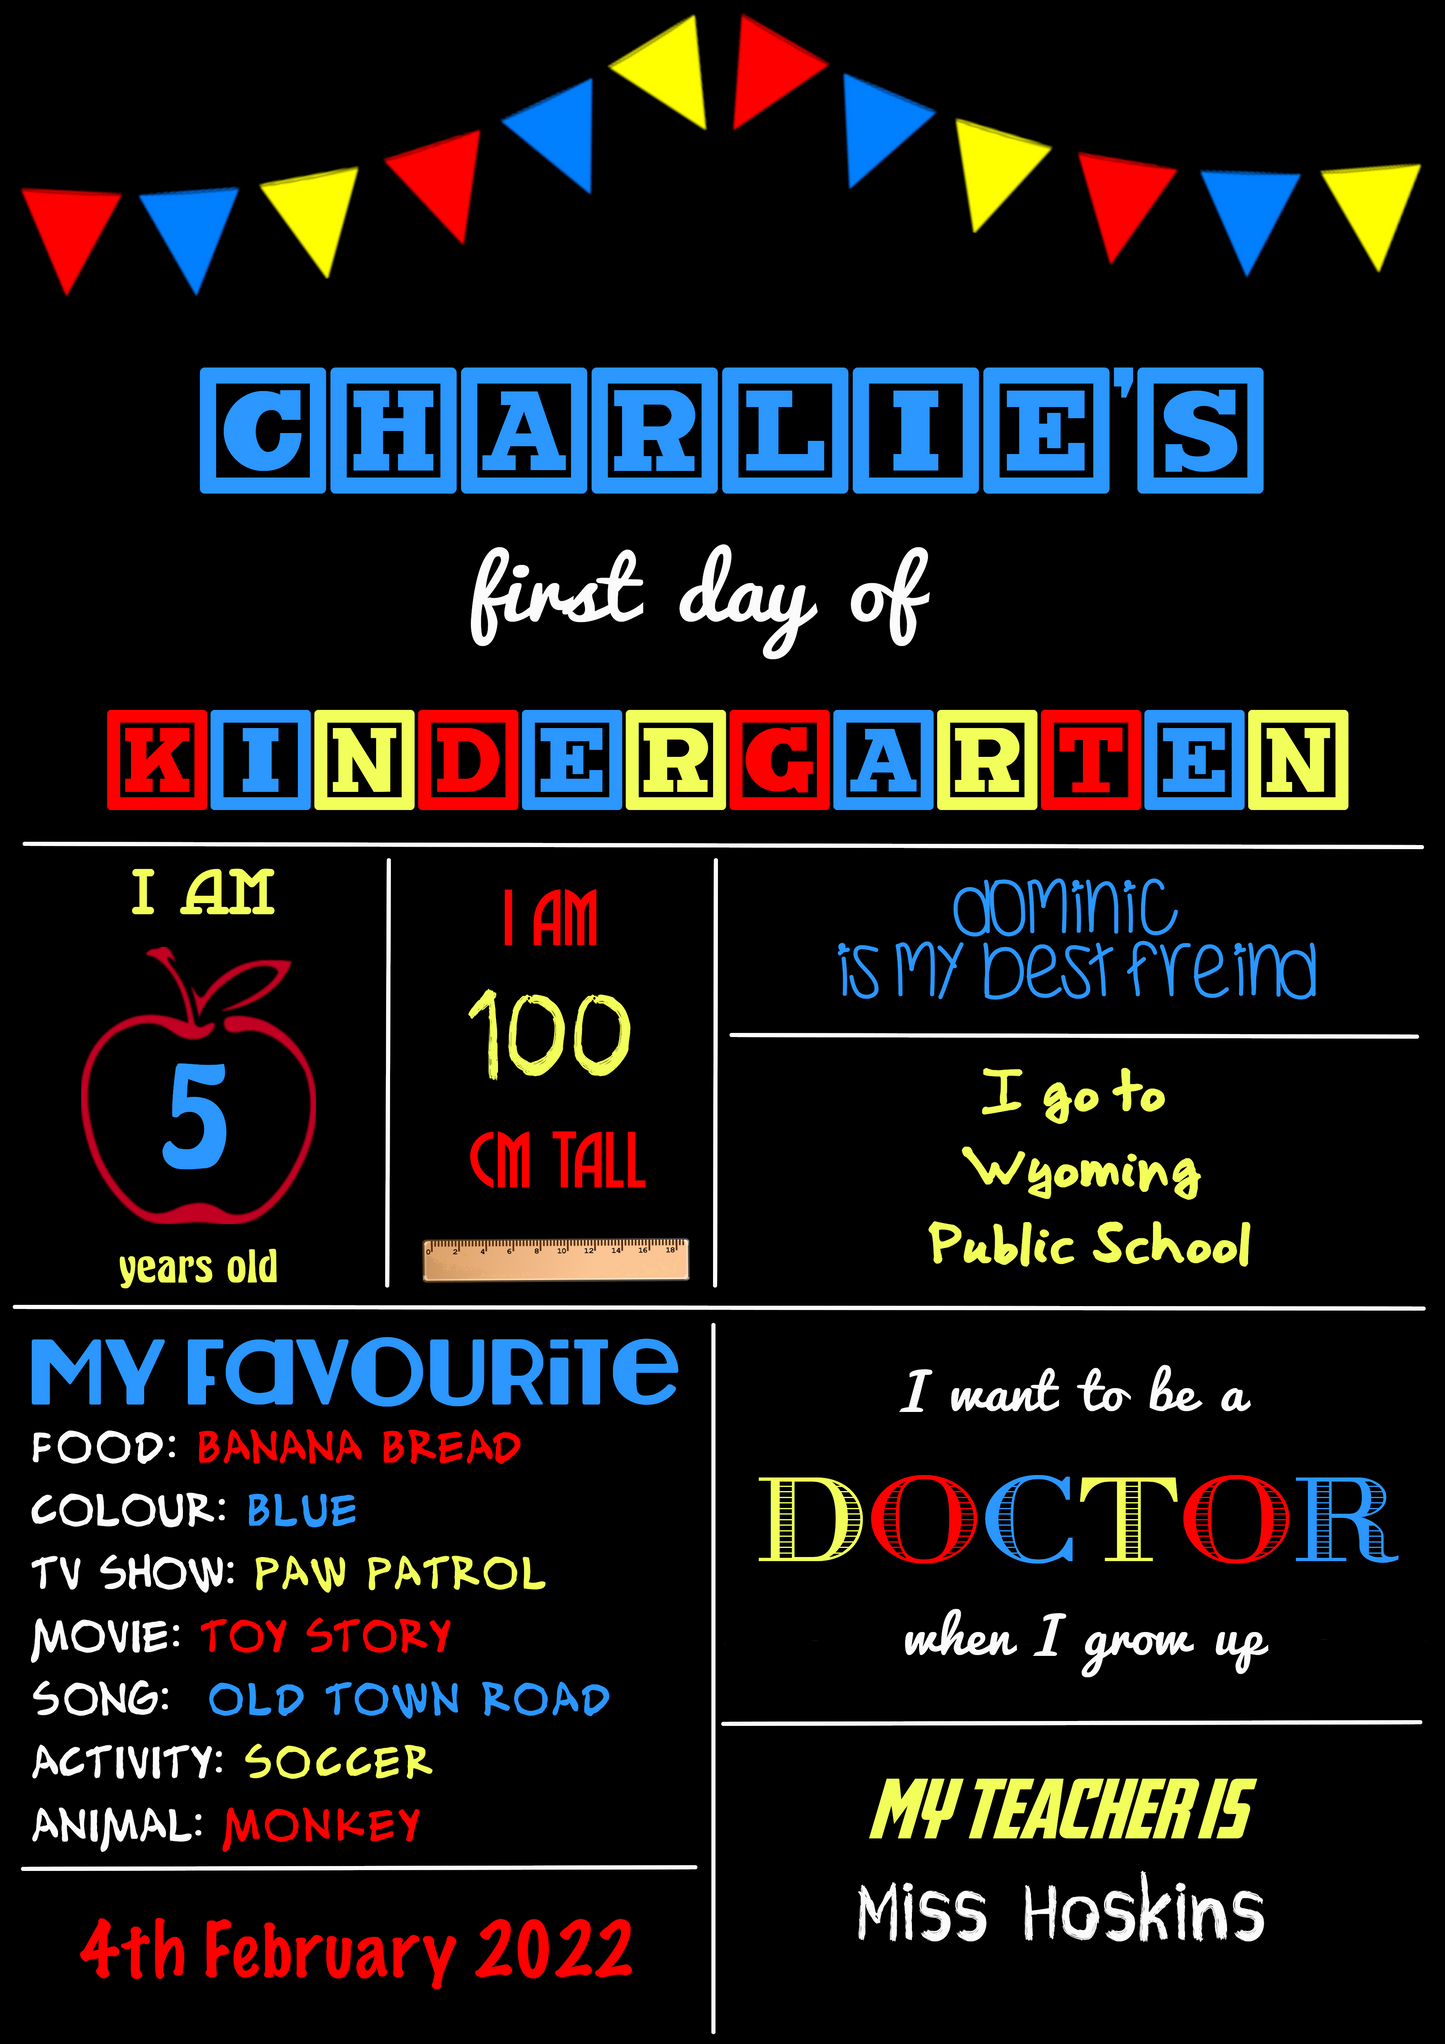 First Day of School poster - CHARLIE THEME